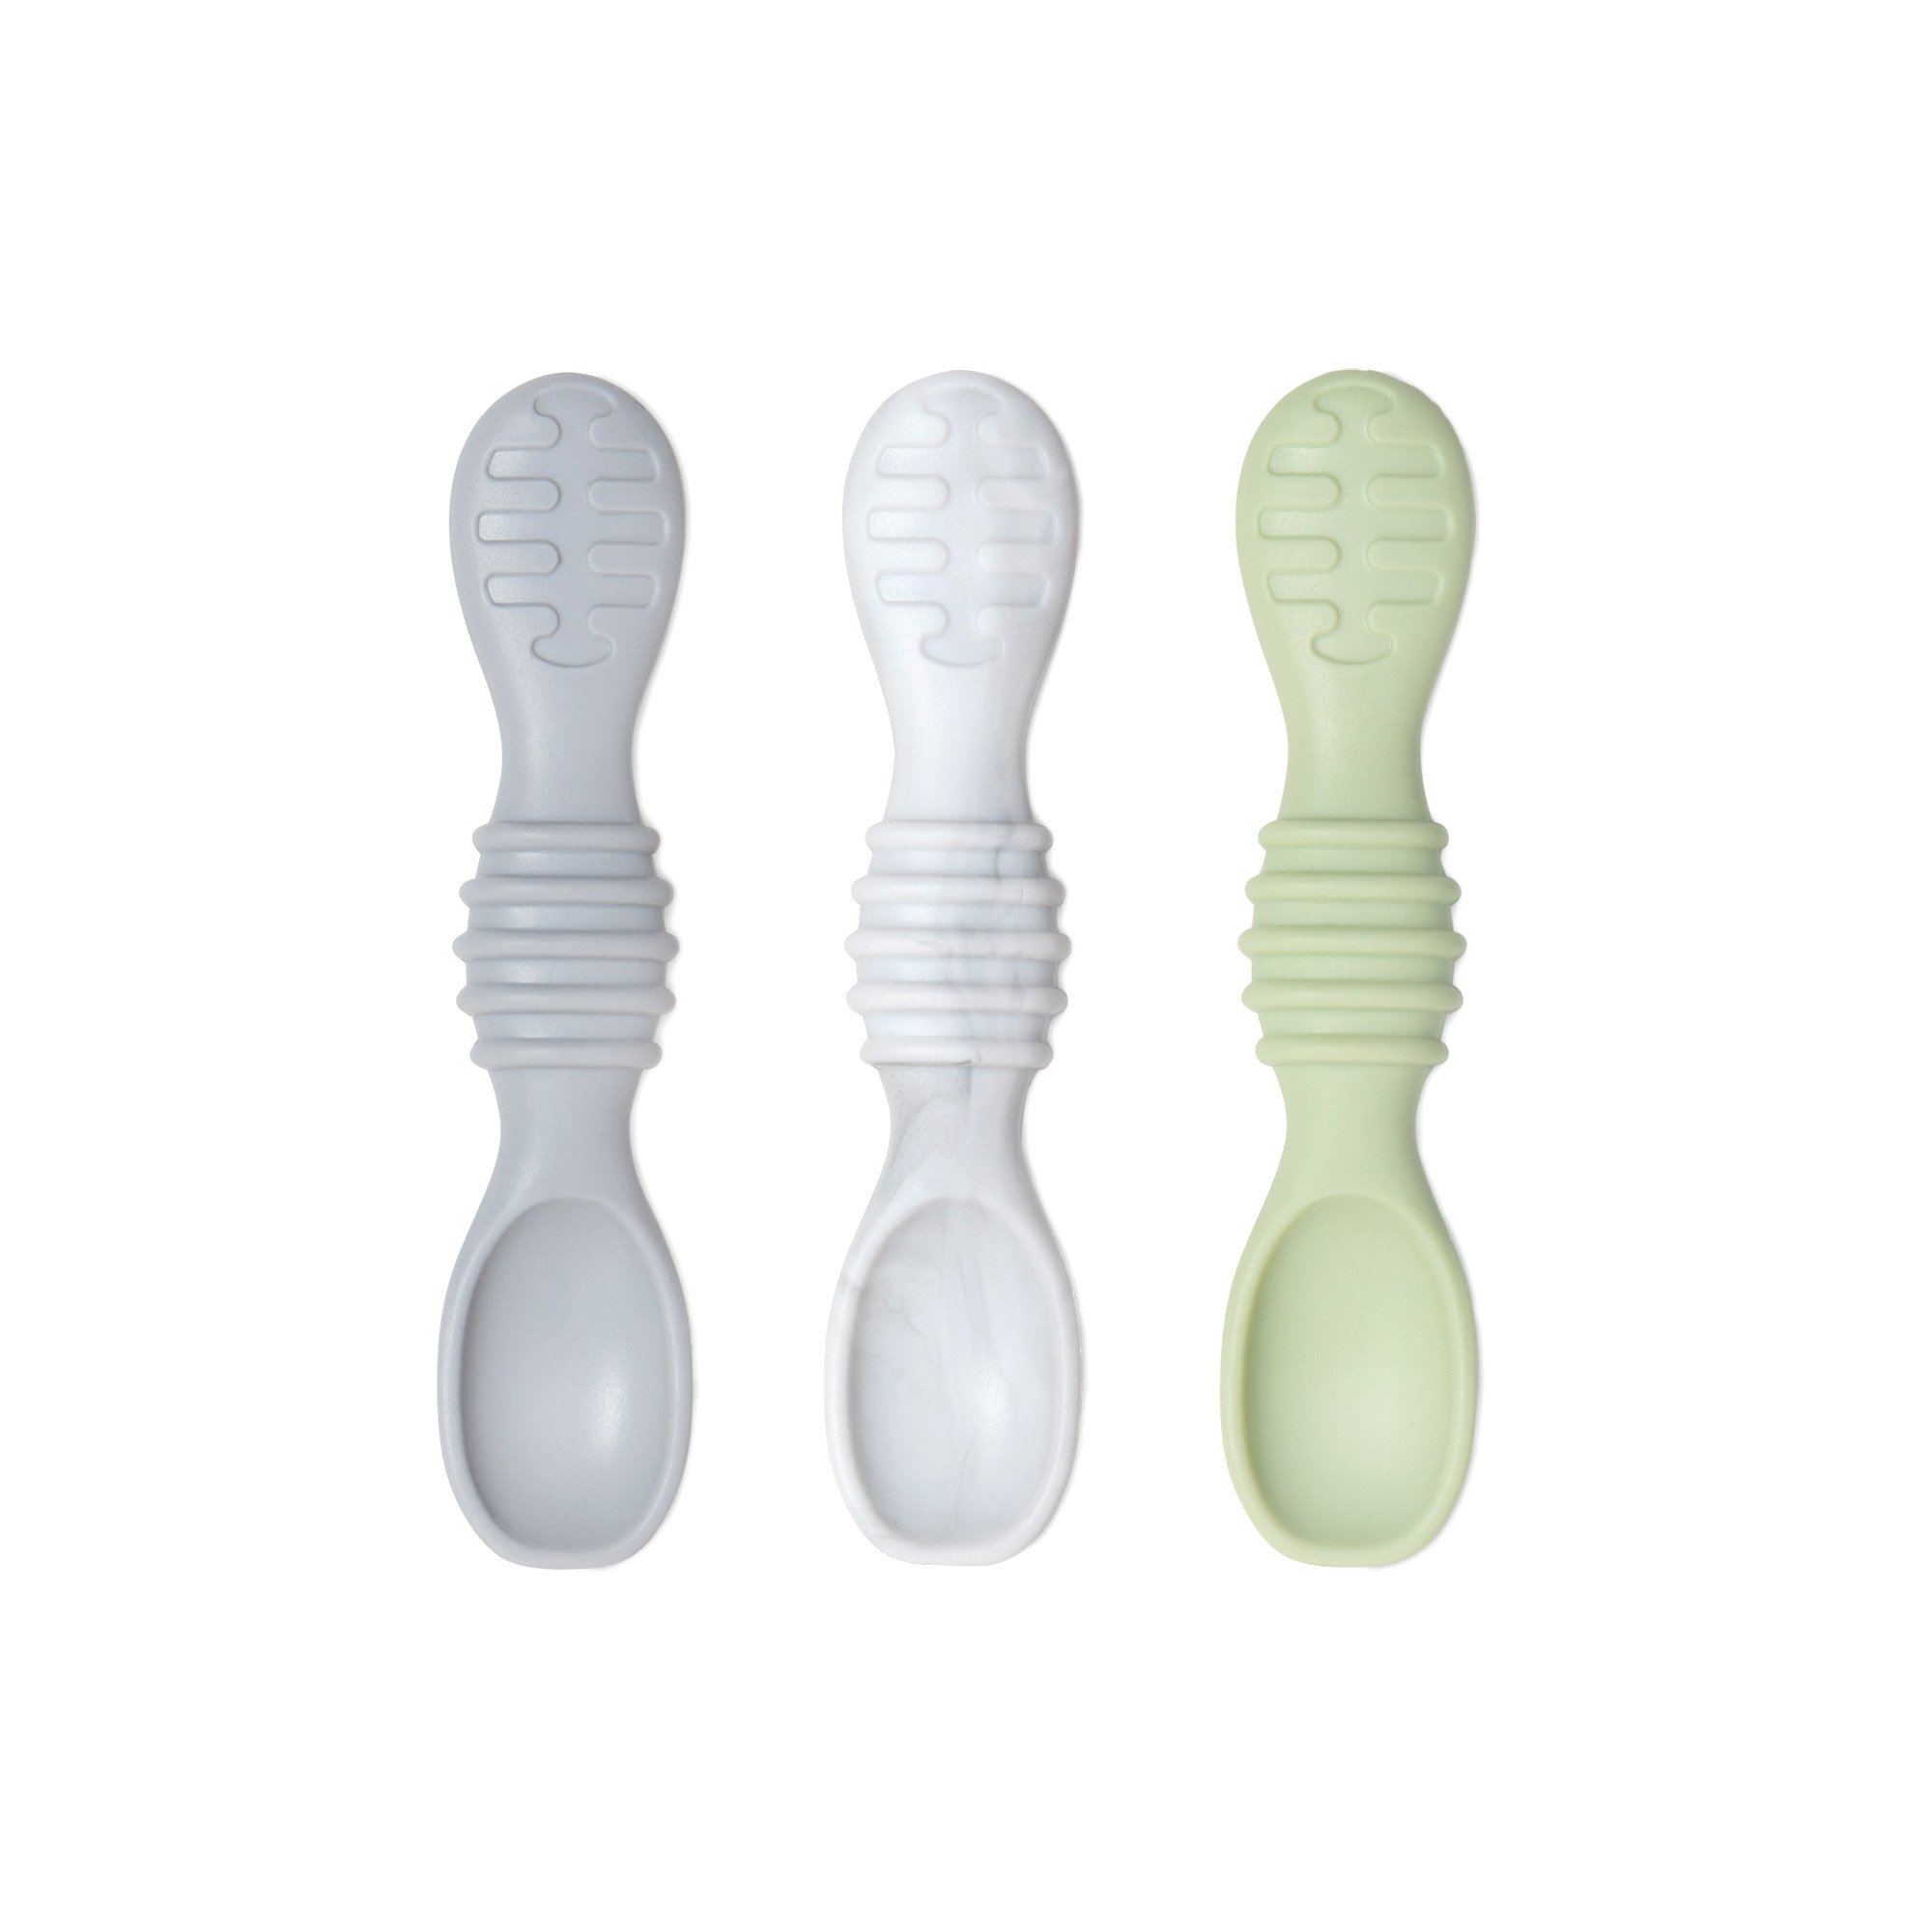  Bumkins Silicone Dipping Spoons  | Taffy